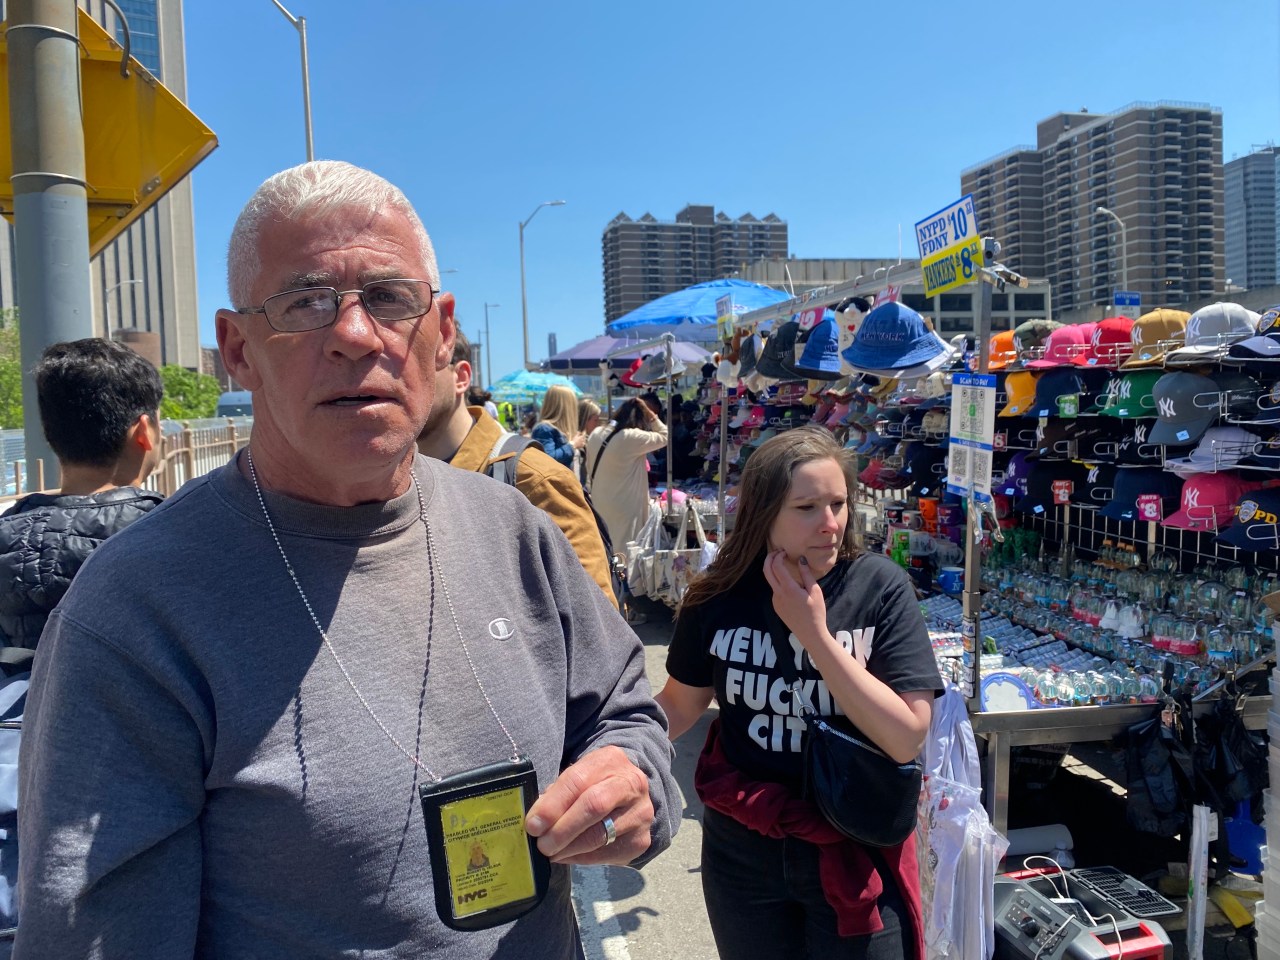 Vendor Robert Velsor said he began selling on the bridge after he was recently booted from Main Street in Flushing. Photo: Kevin Duggan